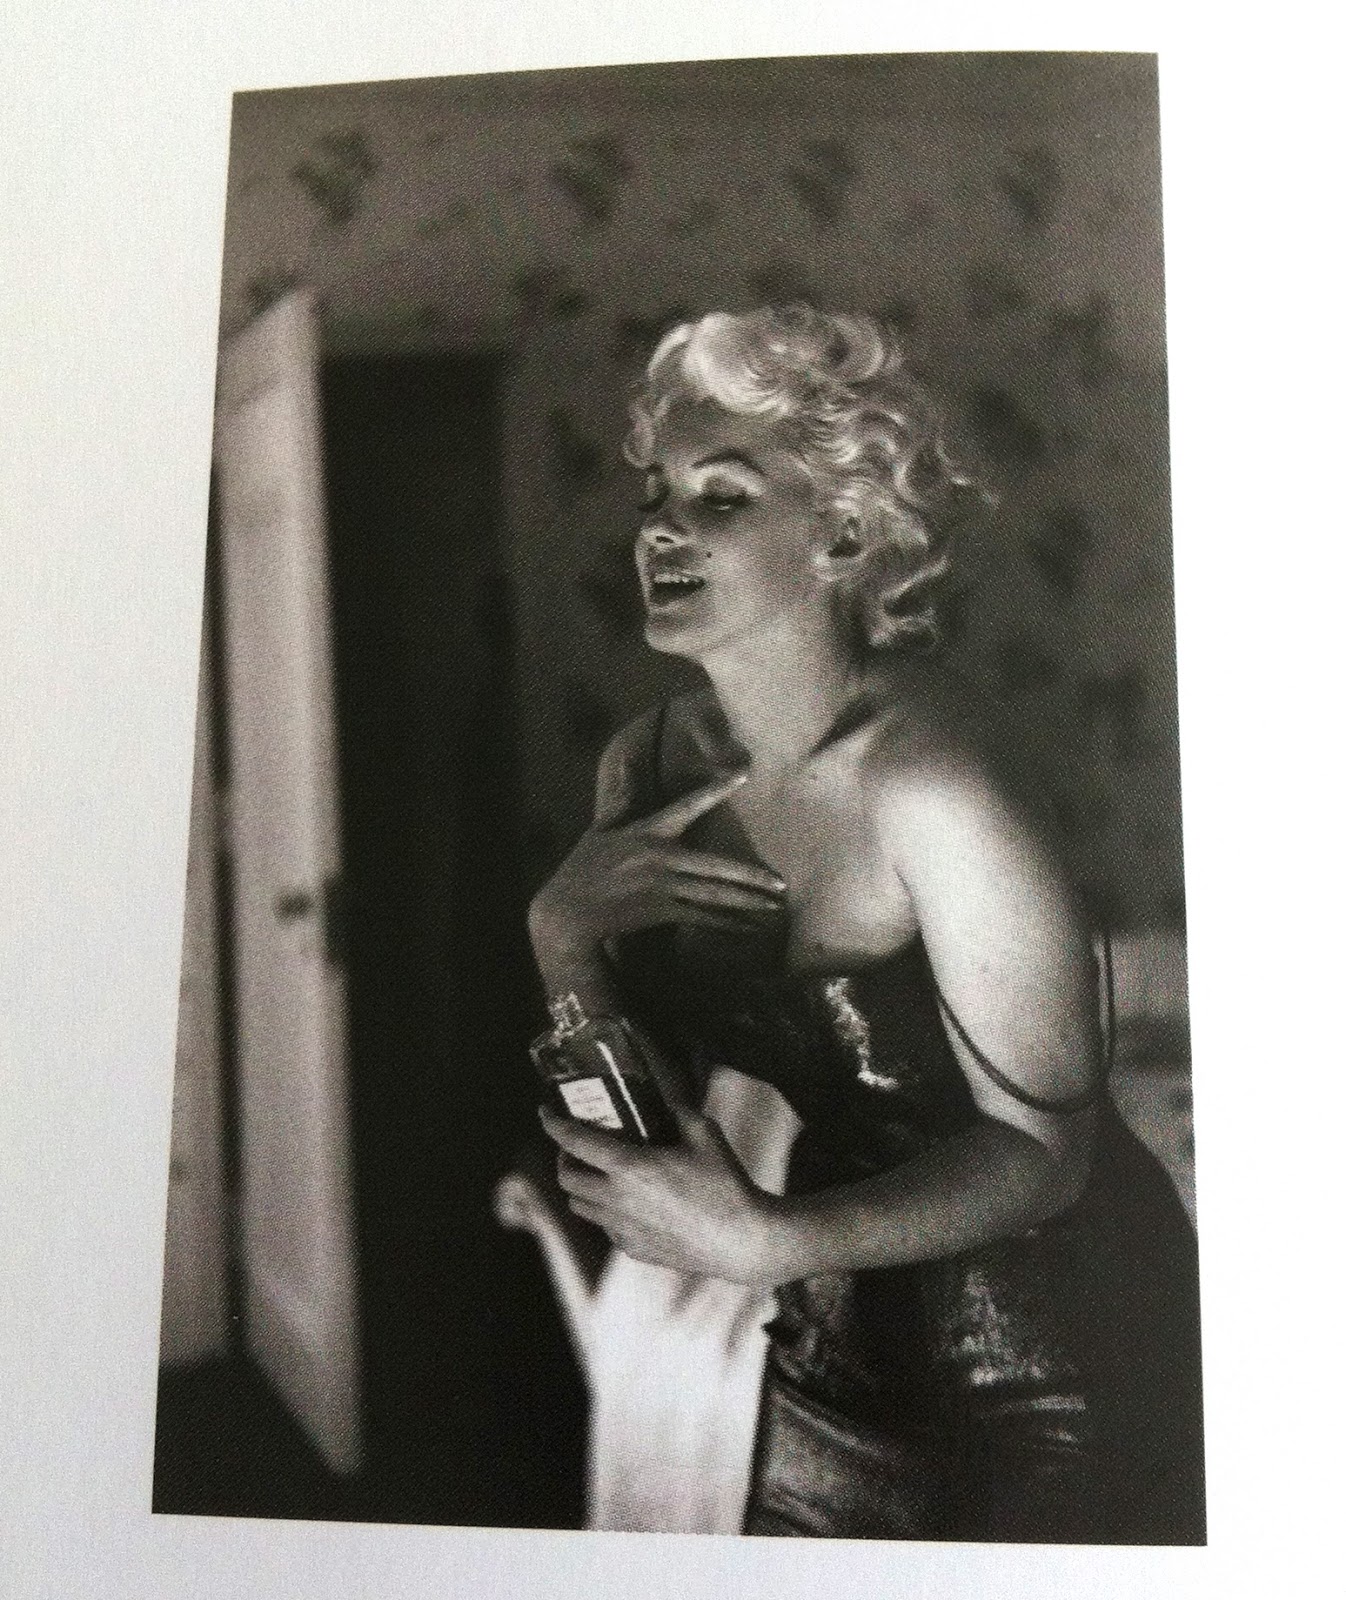 Marilyn Monroe in 1950s with Chanel No. 5 Perfume Modern Postcard